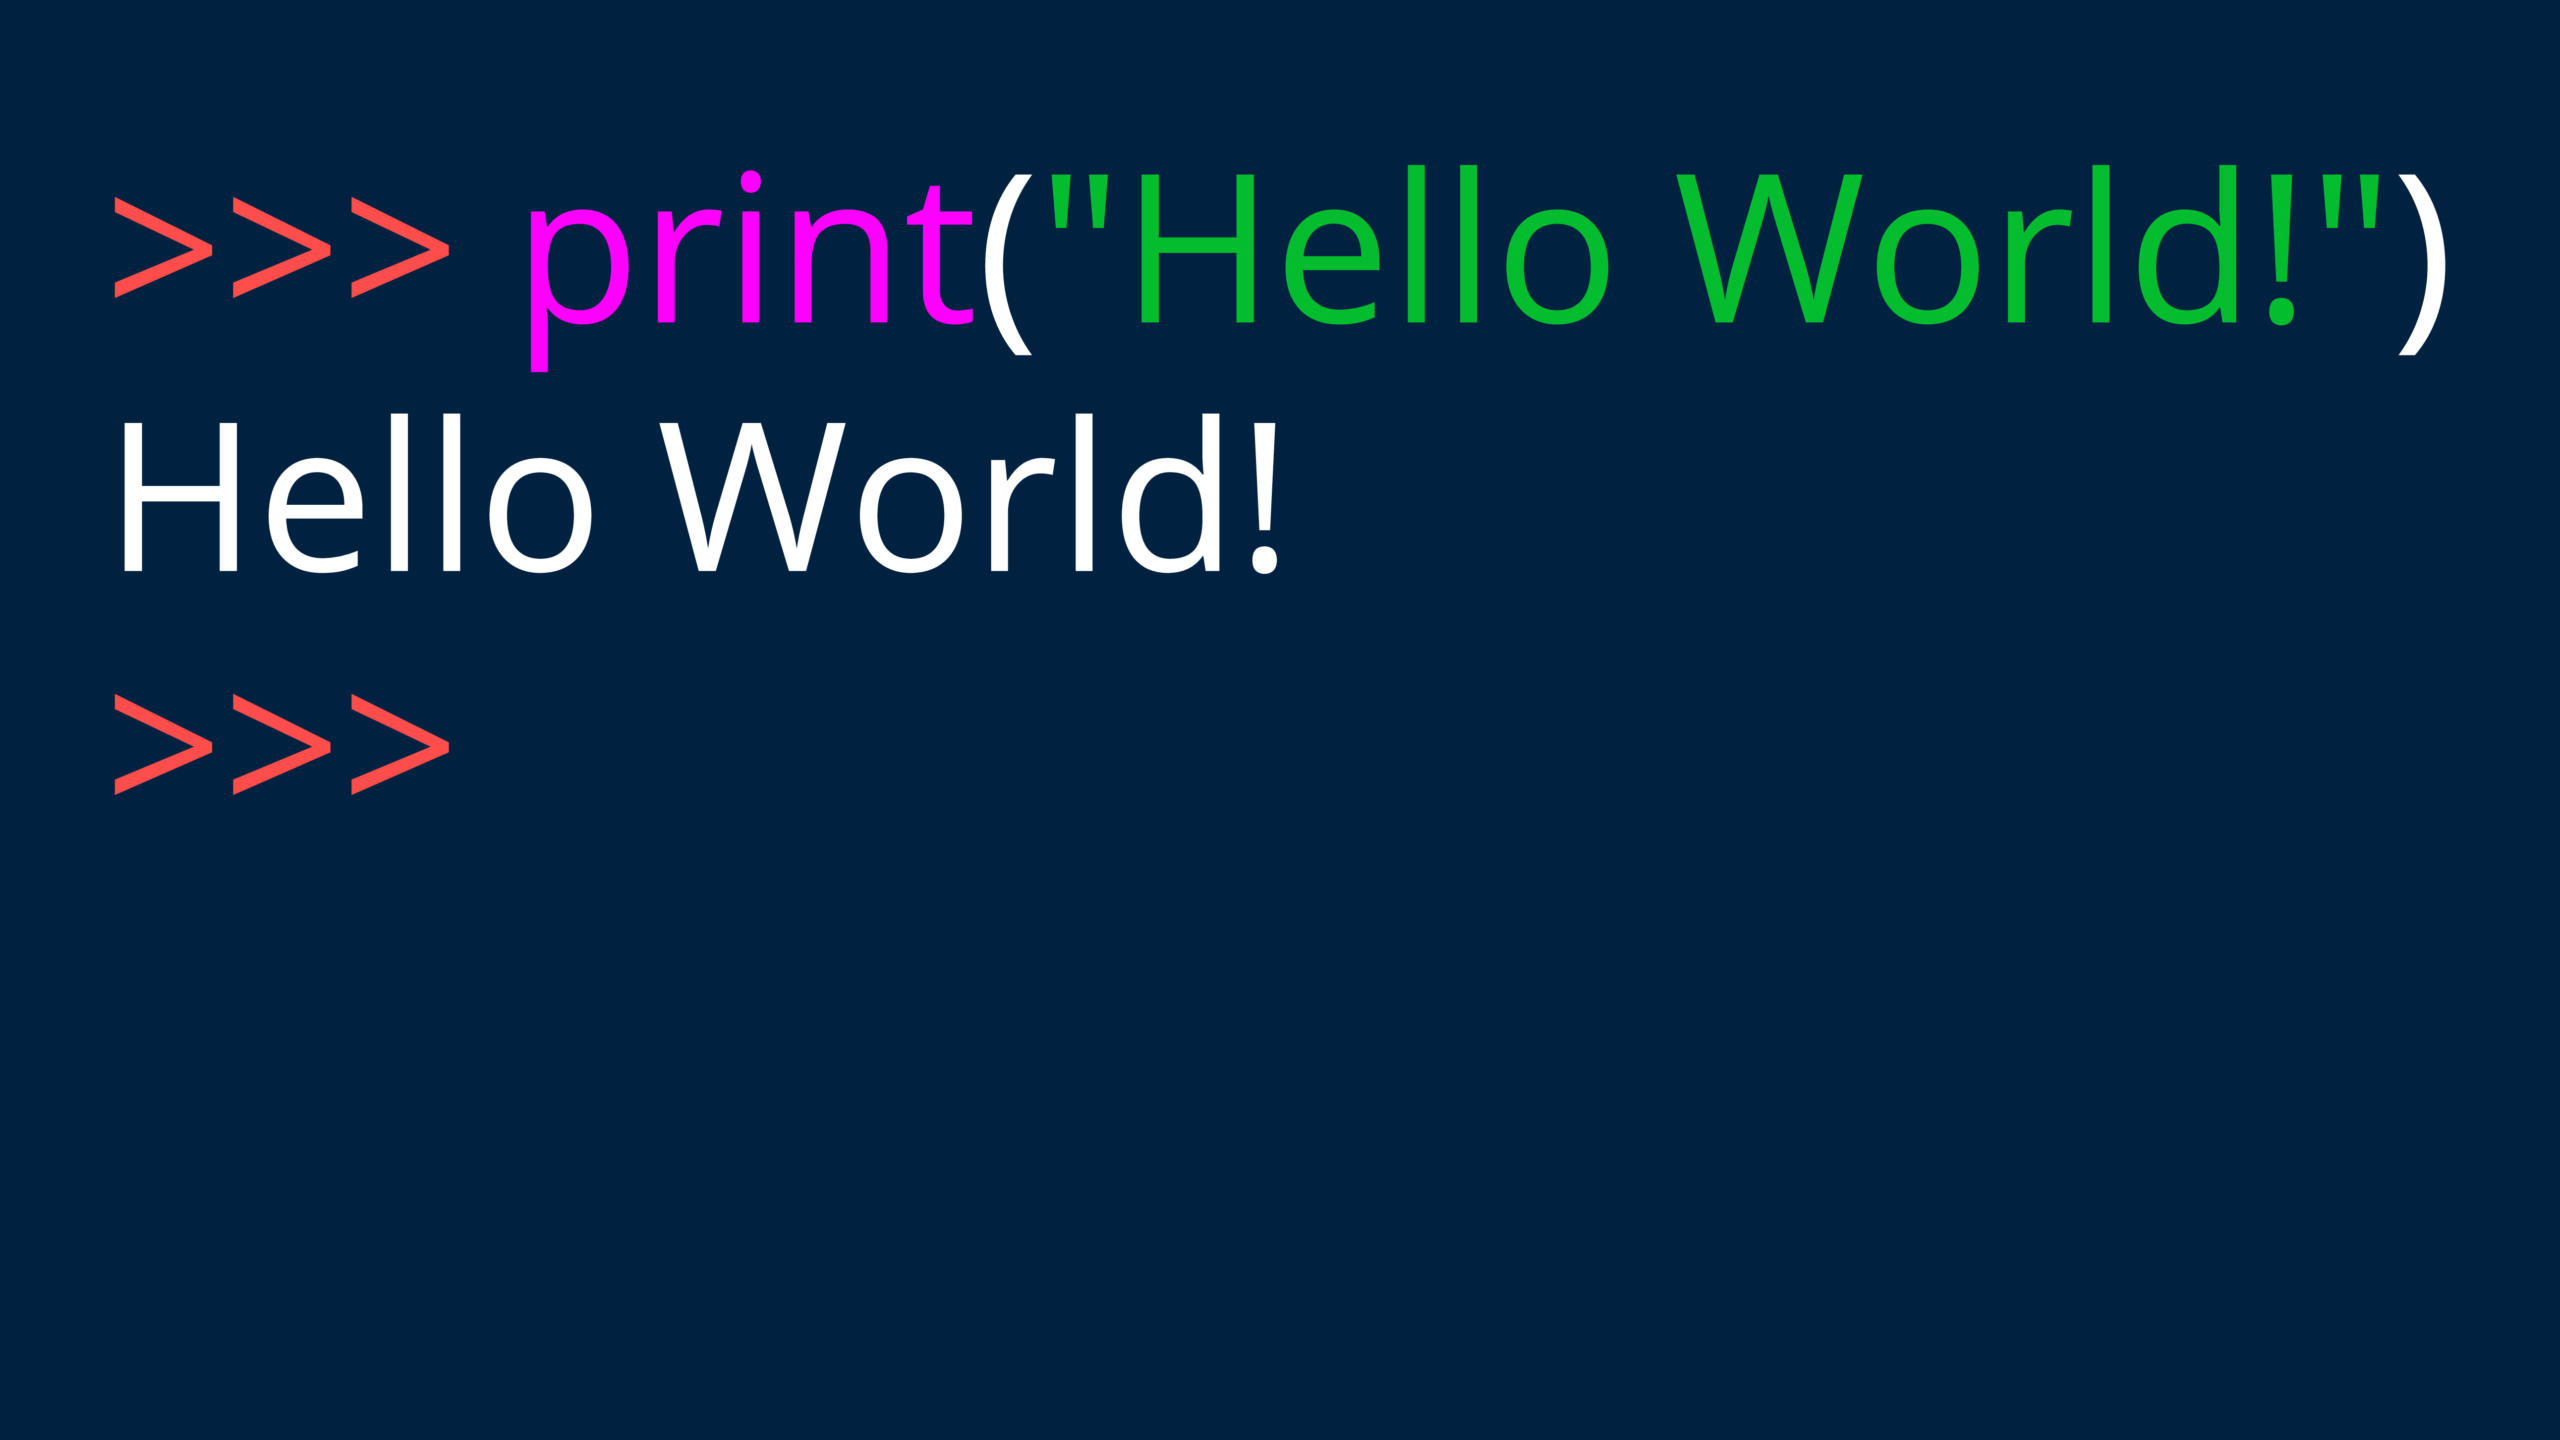 damper blik billet What You Need to Know About Hello World in Python | Udacity